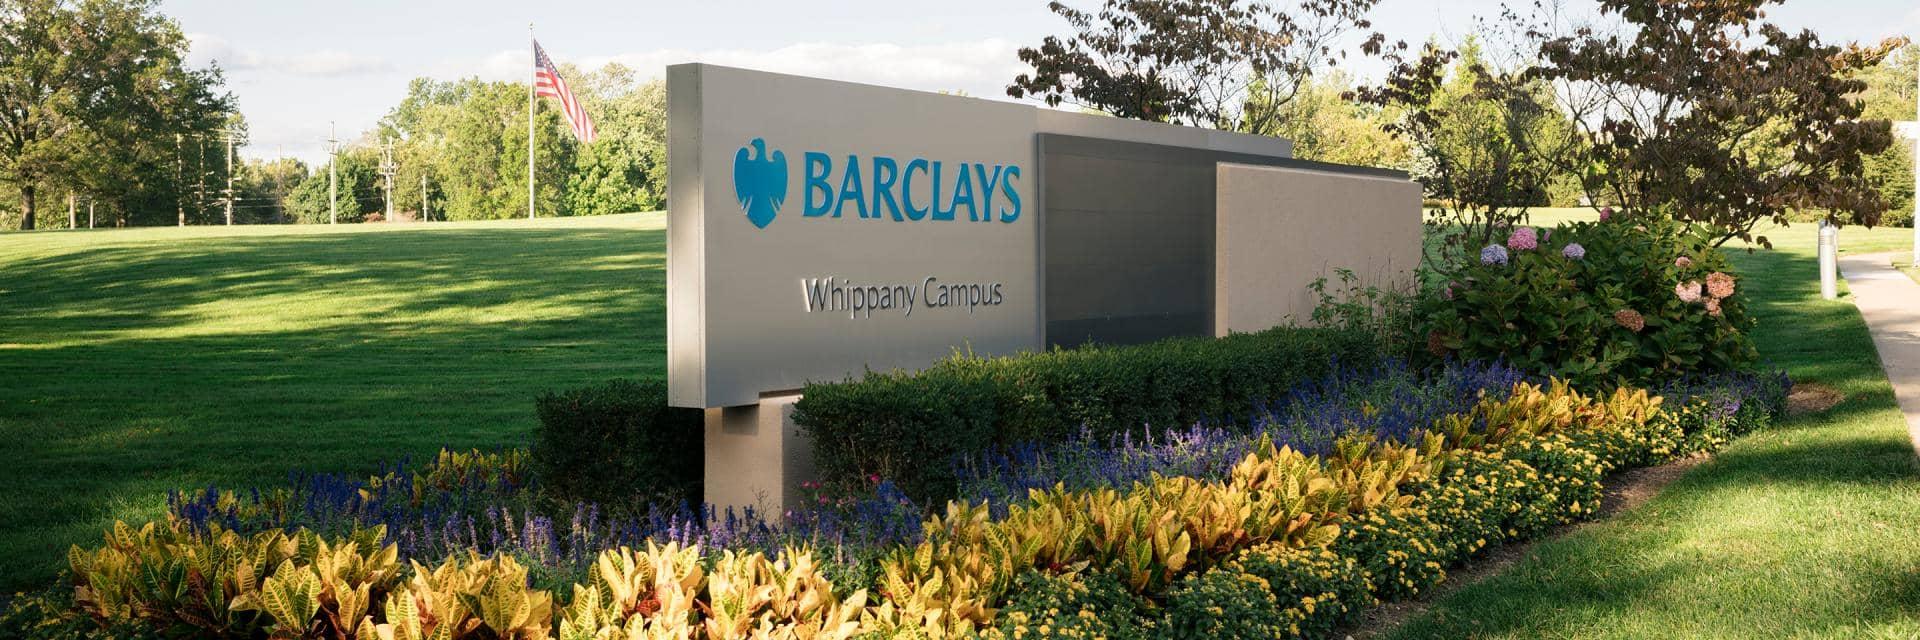 Barclays Whippany campus sign surrounded by plants